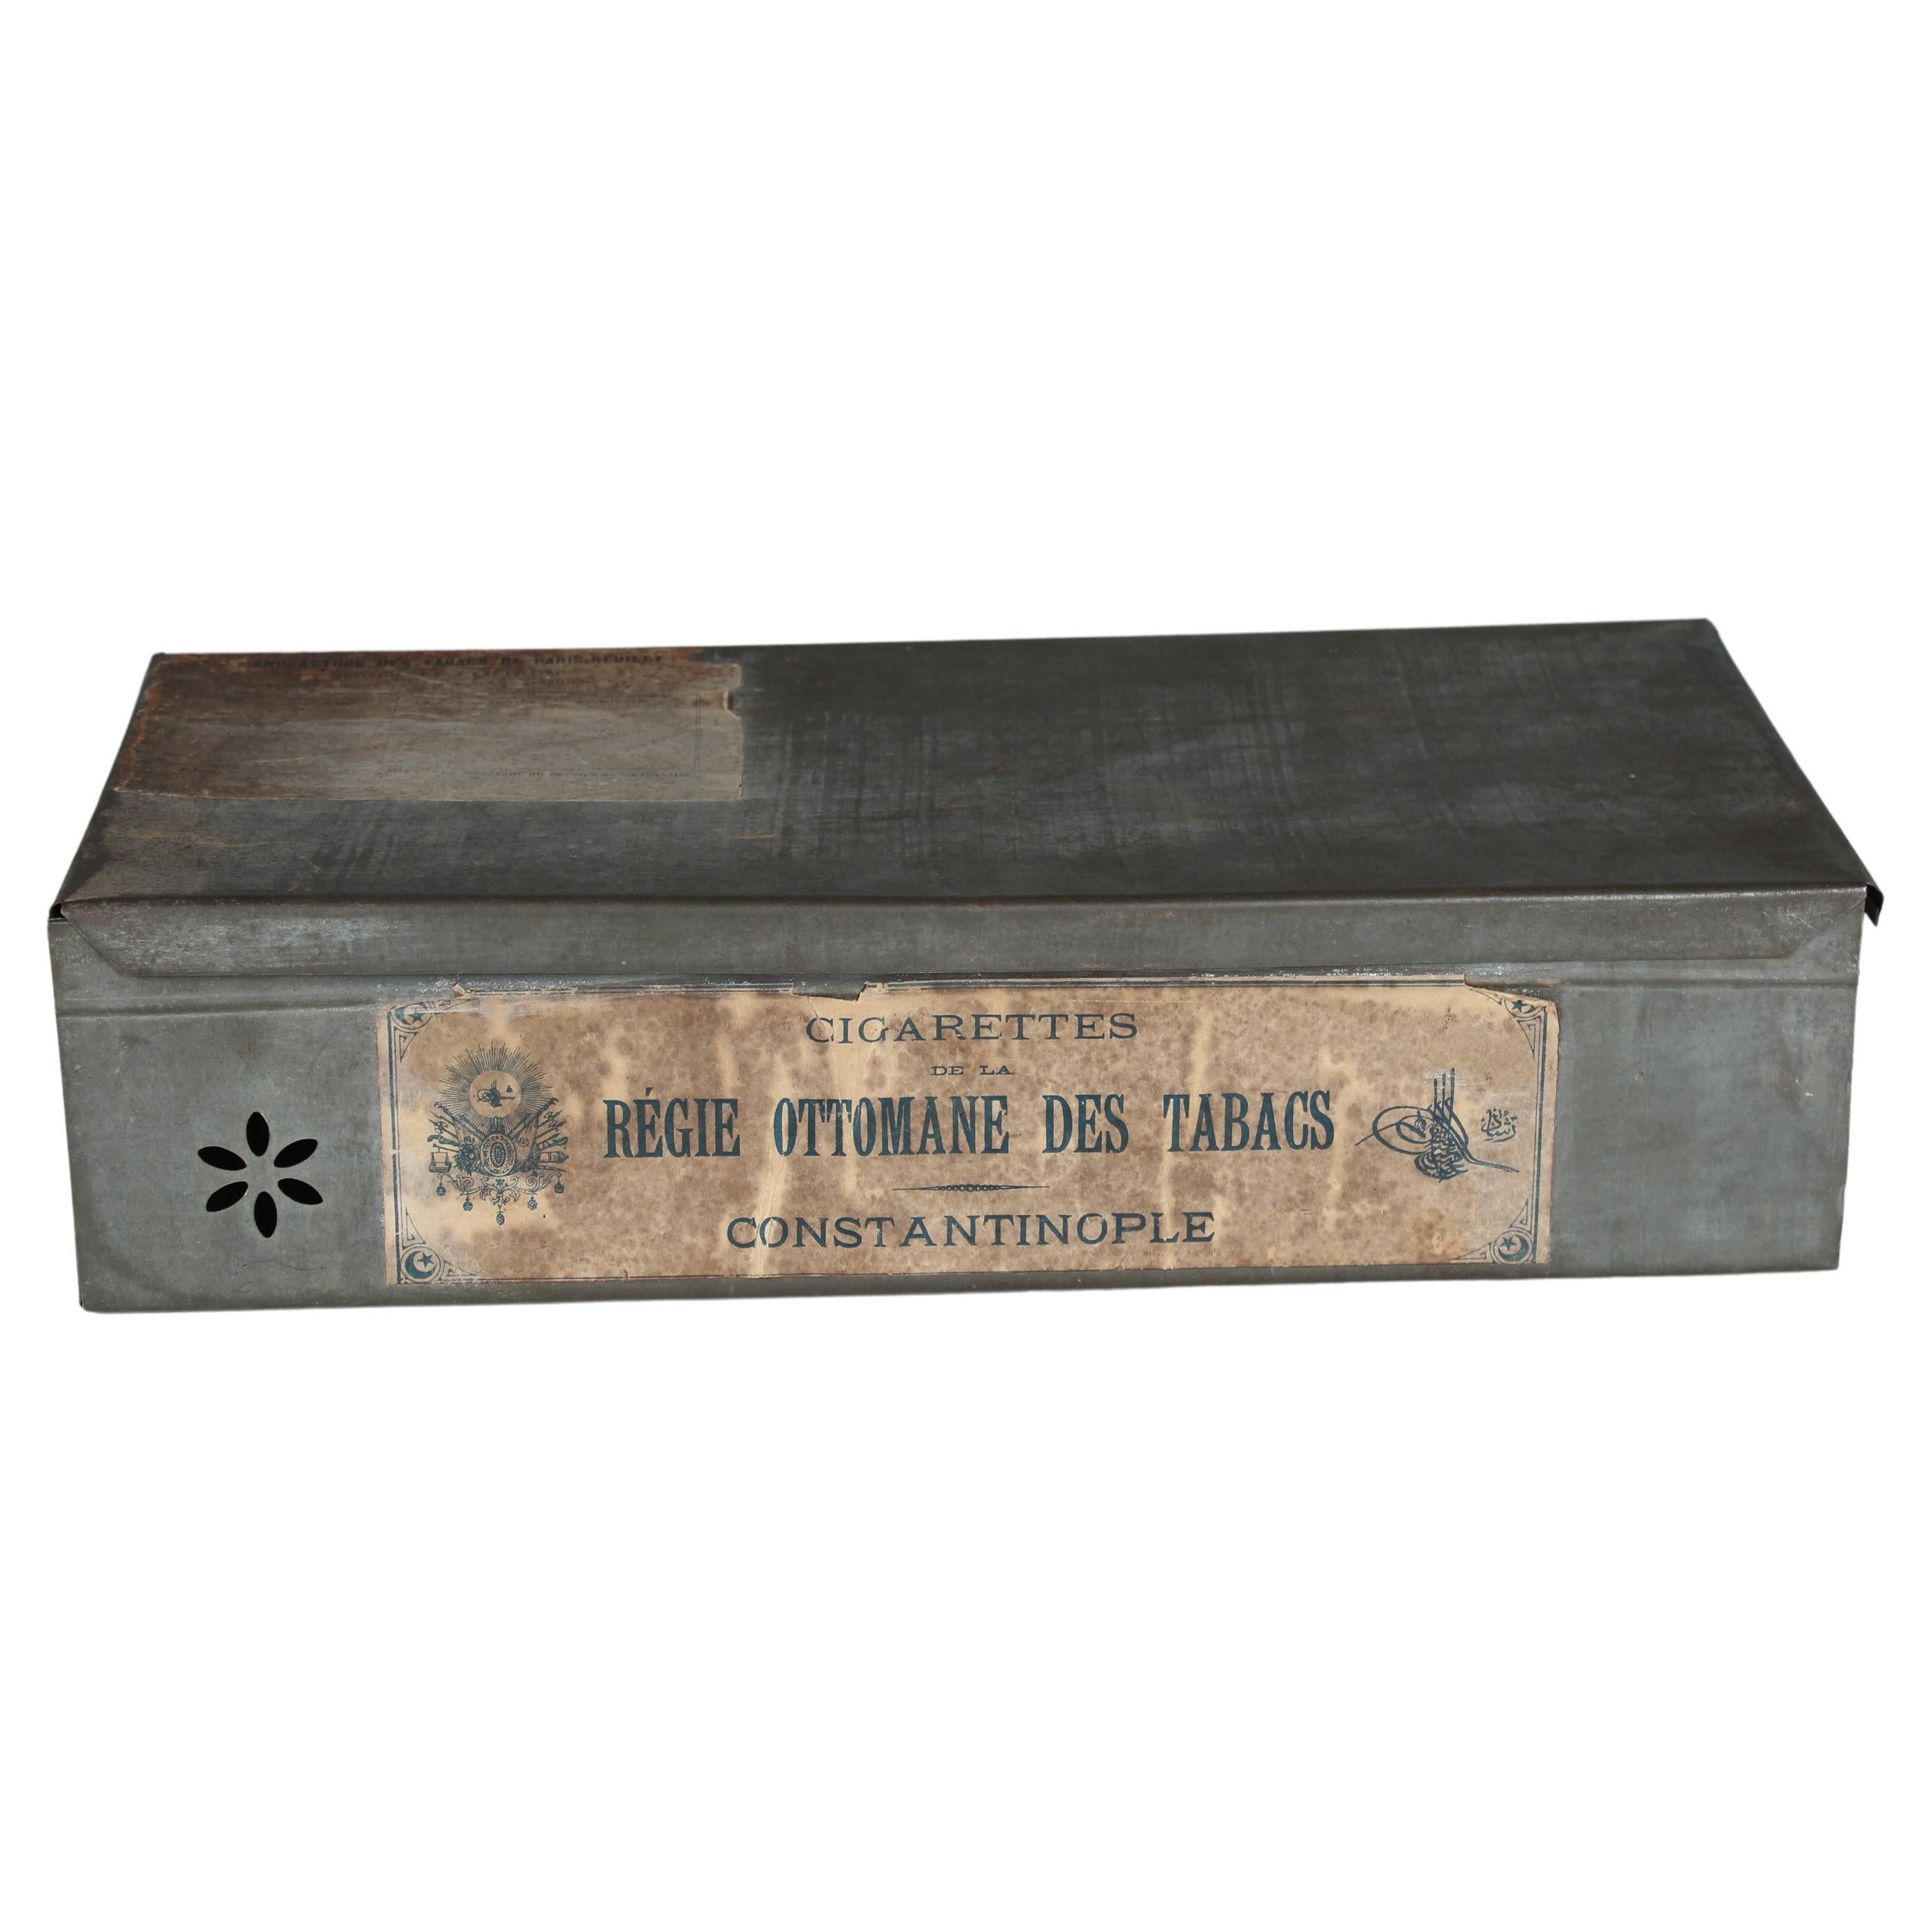 Large Antique Tobacco Tin Box, 1930s 1940s For Sale